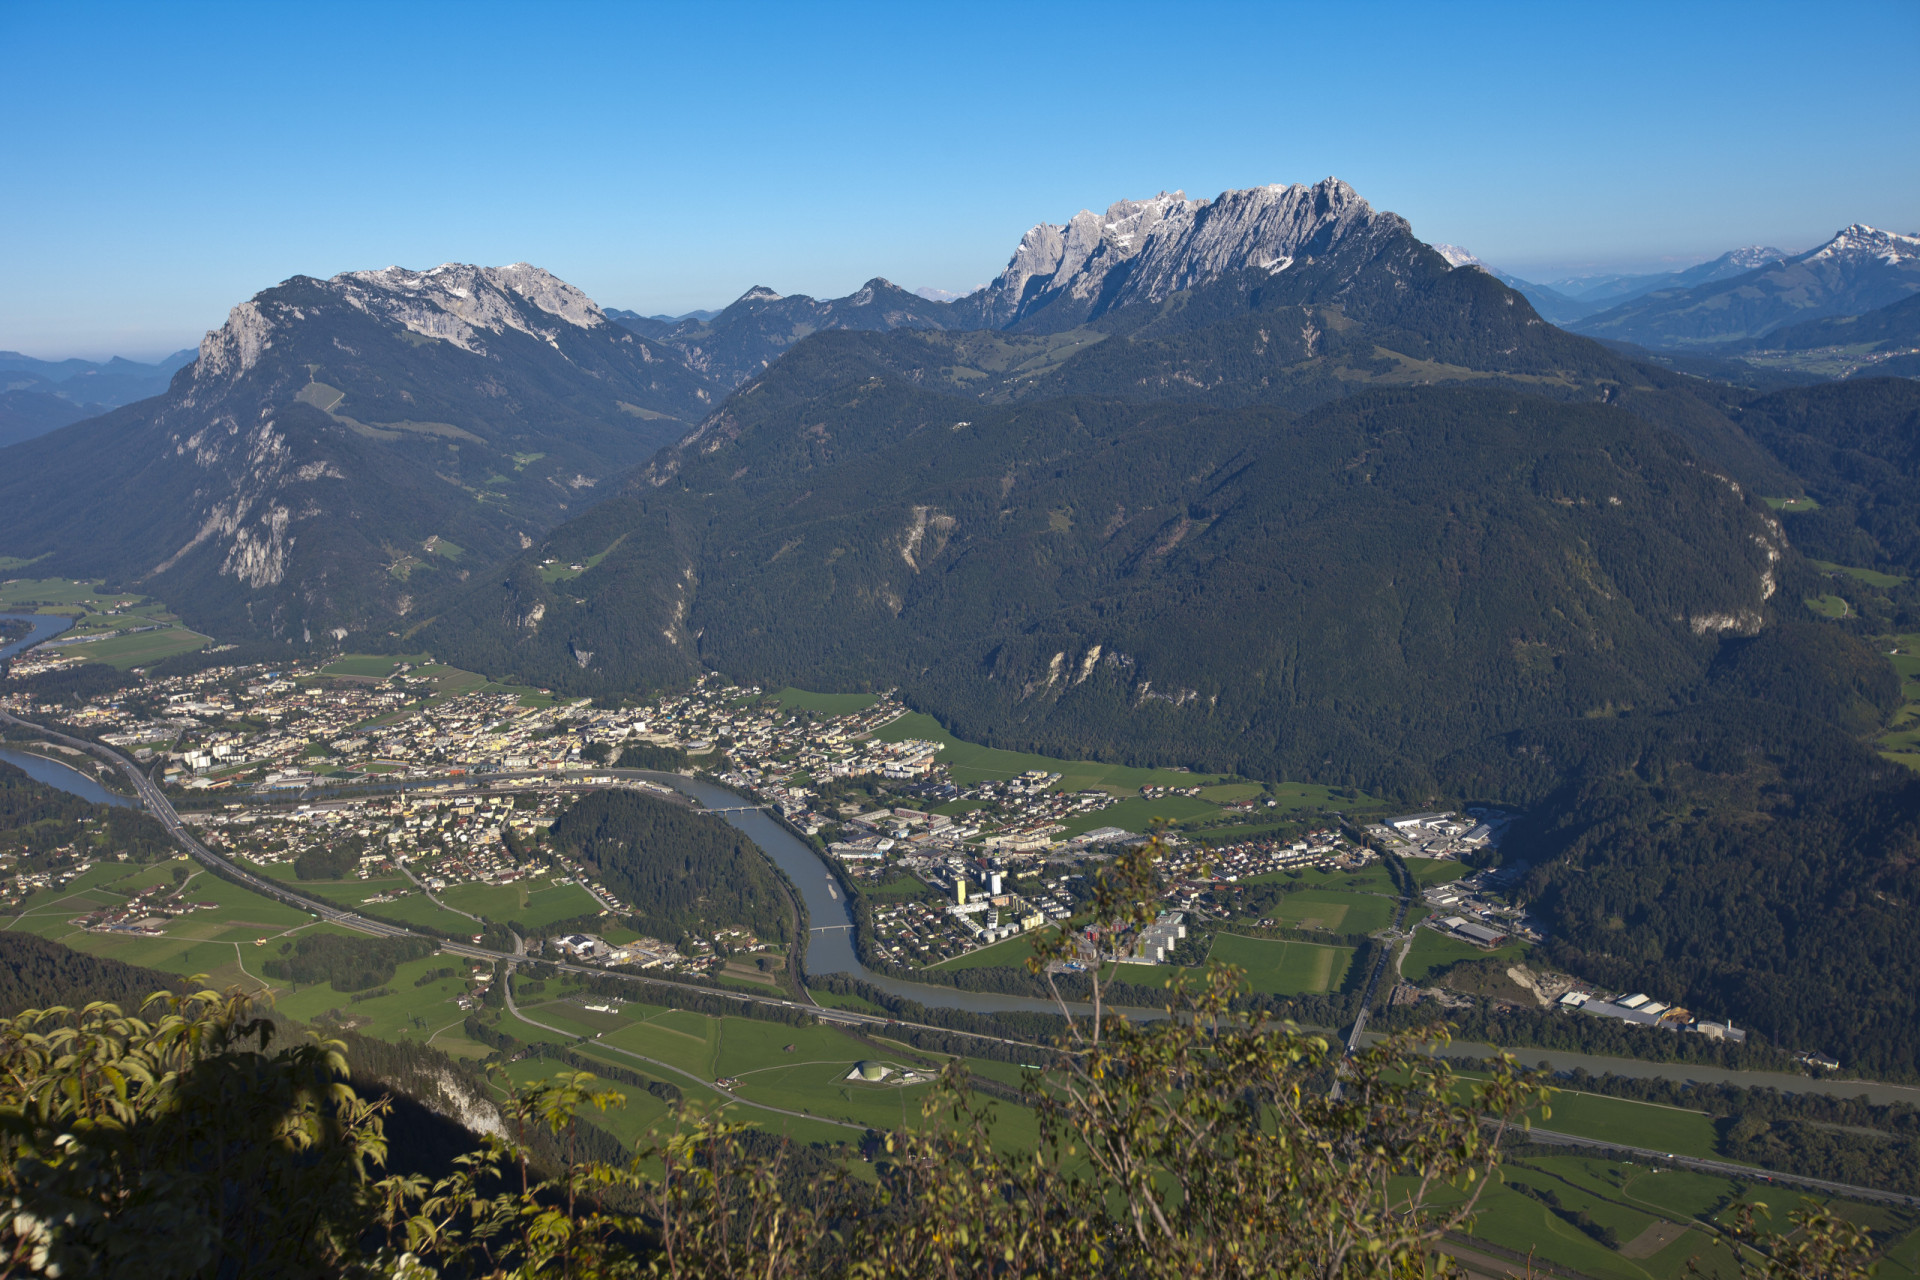 <p>The Romedius pilgrimage trail is perfect for advanced hikers. Starting at the village of Thaur in Austria, you'll follow the footsteps of Saint Romedius to San Romedio in Italy.</p><p><a href="https://www.msn.com/en-us/community/channel/vid-7xx8mnucu55yw63we9va2gwr7uihbxwc68fxqp25x6tg4ftibpra?cvid=94631541bc0f4f89bfd59158d696ad7e">Follow us and access great exclusive content every day</a></p>